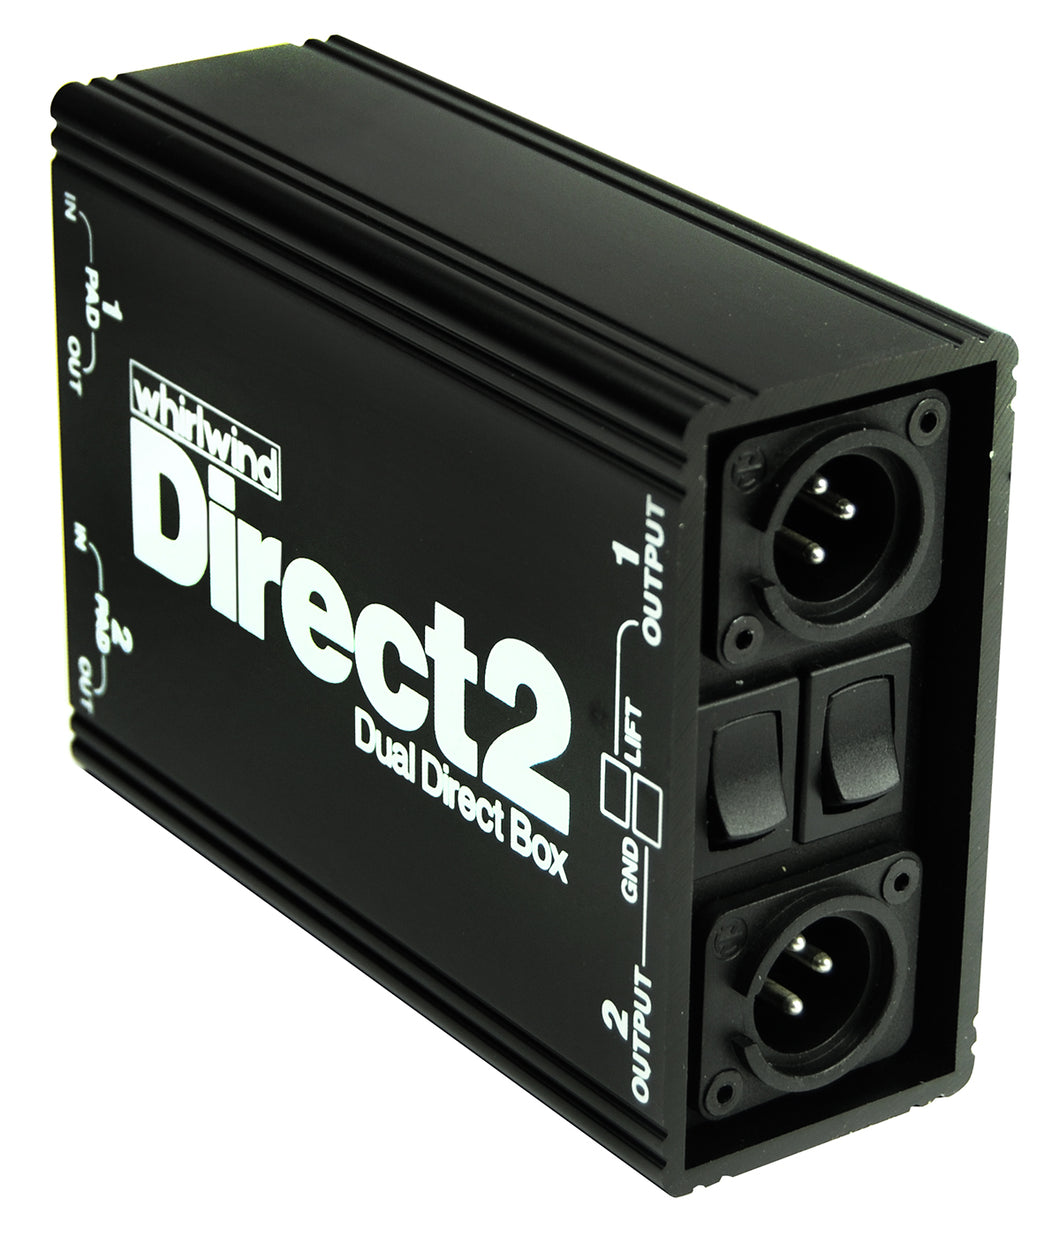 Whirlwind Direct2 - 2 Channel passive direct box